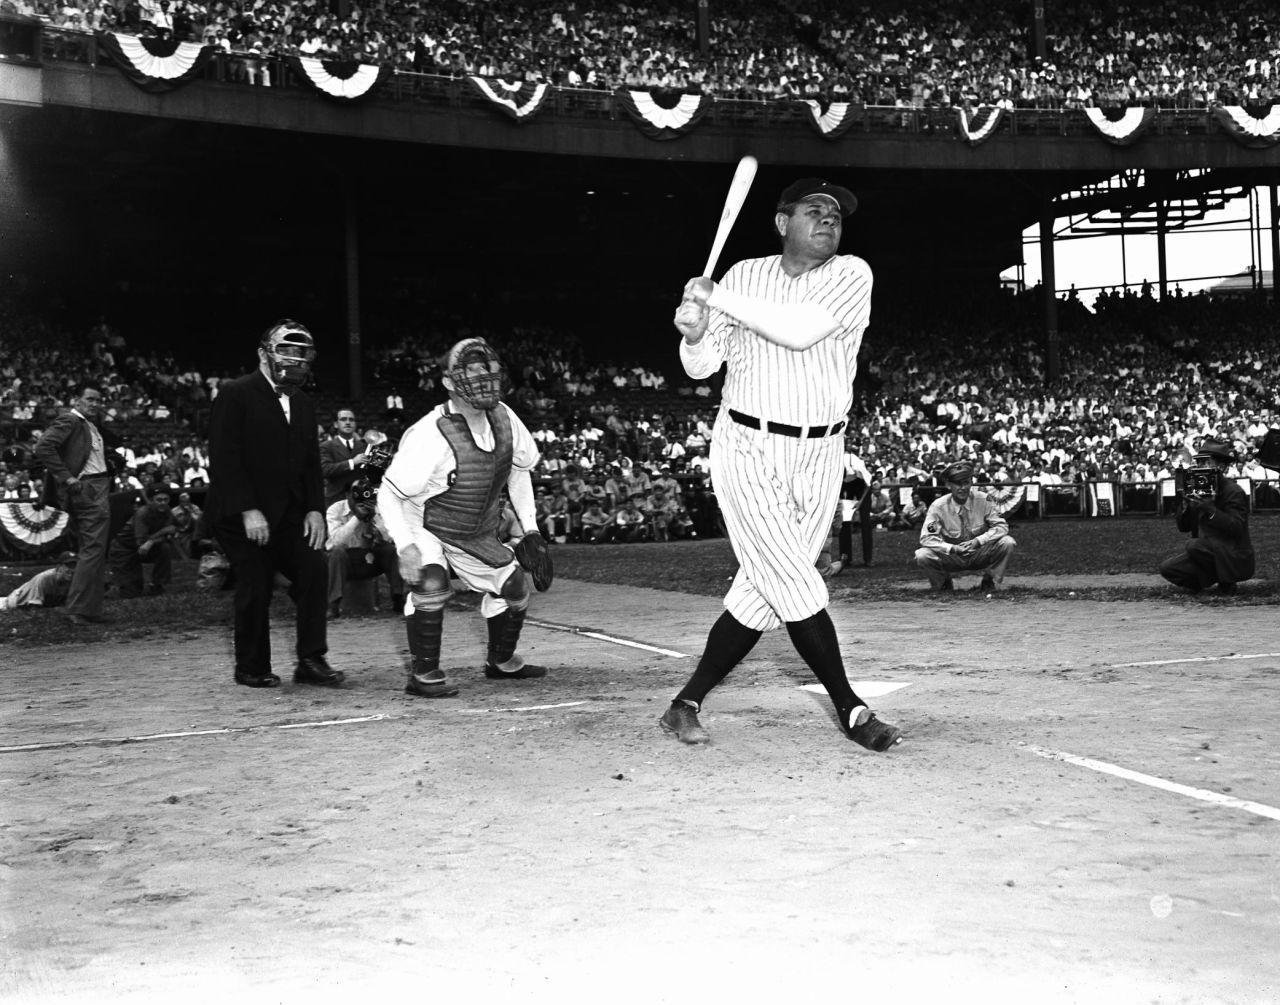 Legendary baseball player Babe Ruth takes a swing during the 1934 All-Star Game. The game was played at the Polo Grounds in New York.